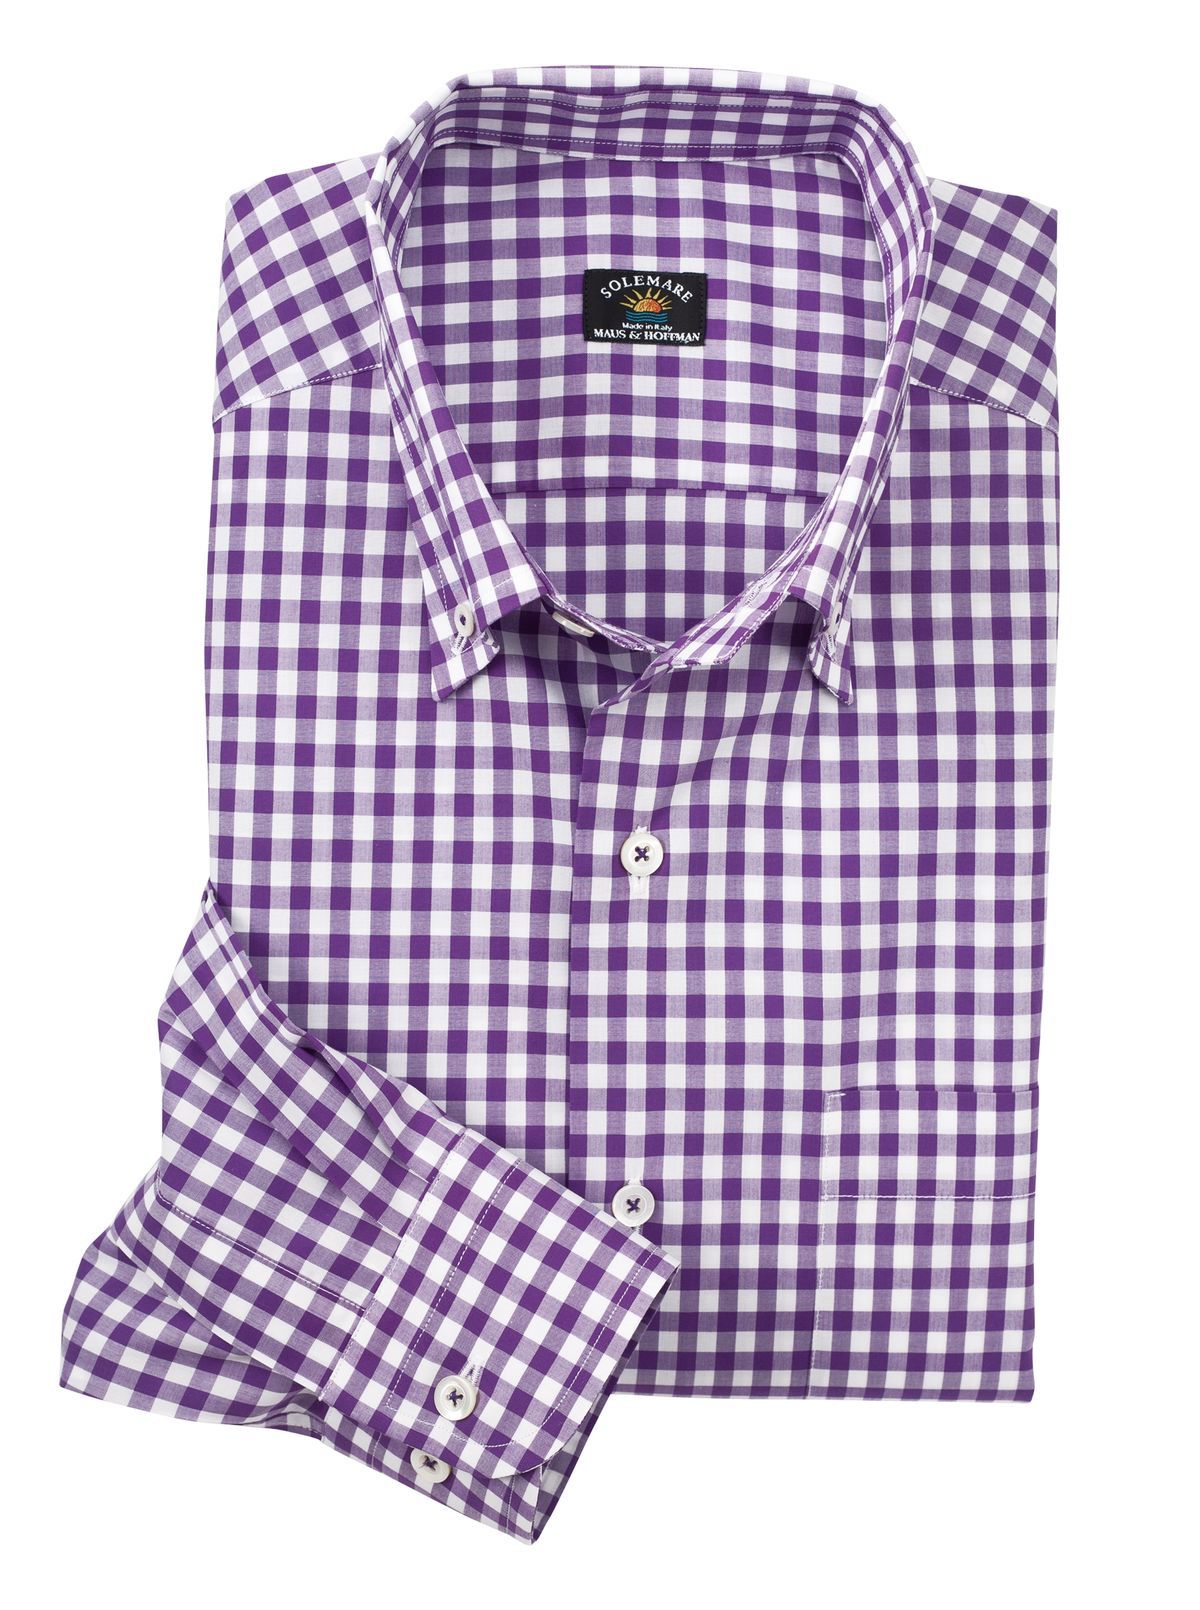 Solemare Check Sport Shirts at Maus & Hoffman